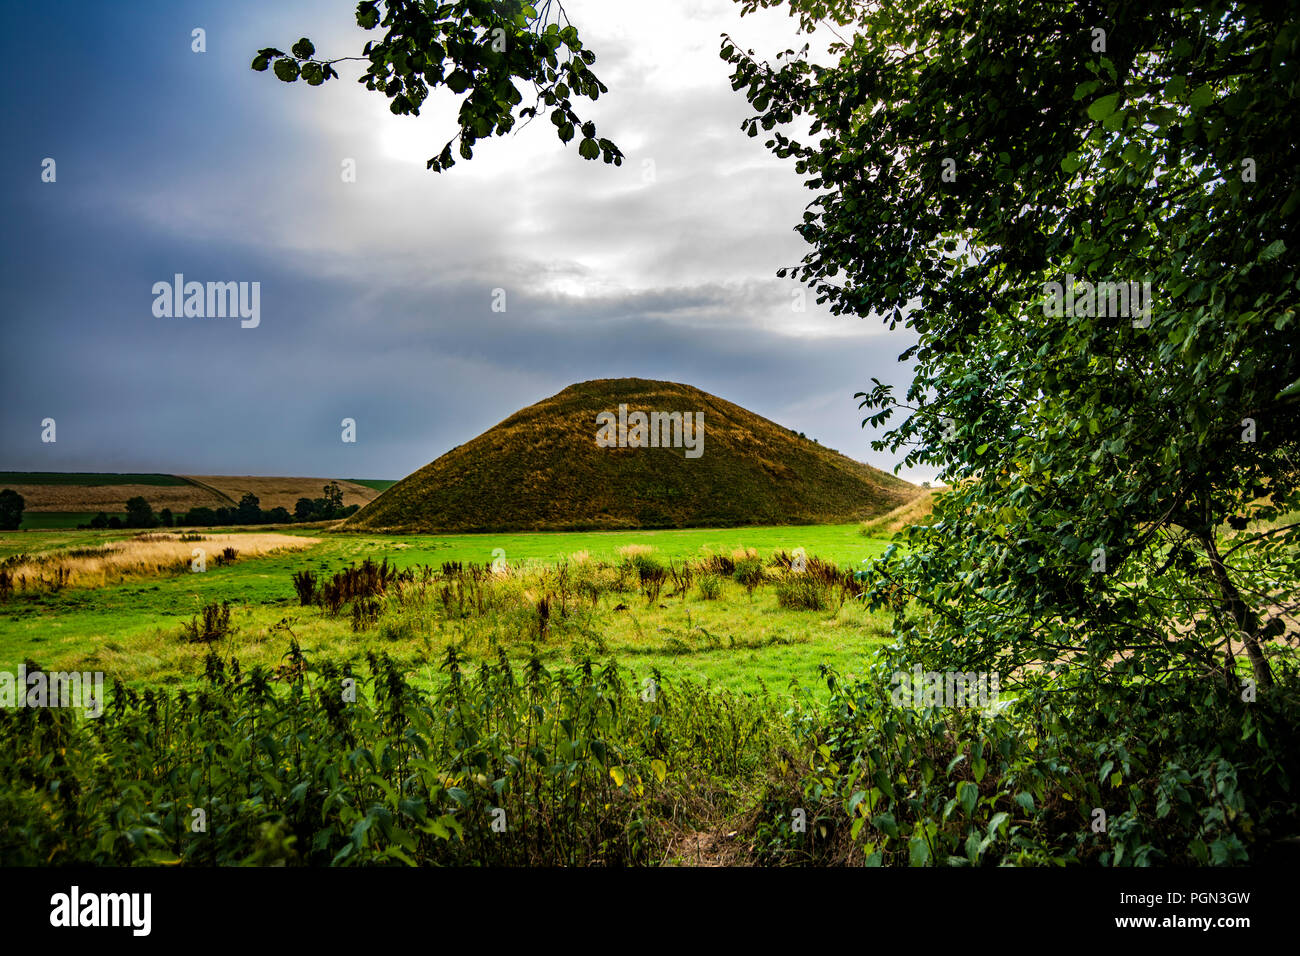 Silbury Hill, the largest man-made Neolithic mound in Europe, covering 5 acres. It was built over a 100-year period around 2,400 BCE by Beaker culture Stock Photo